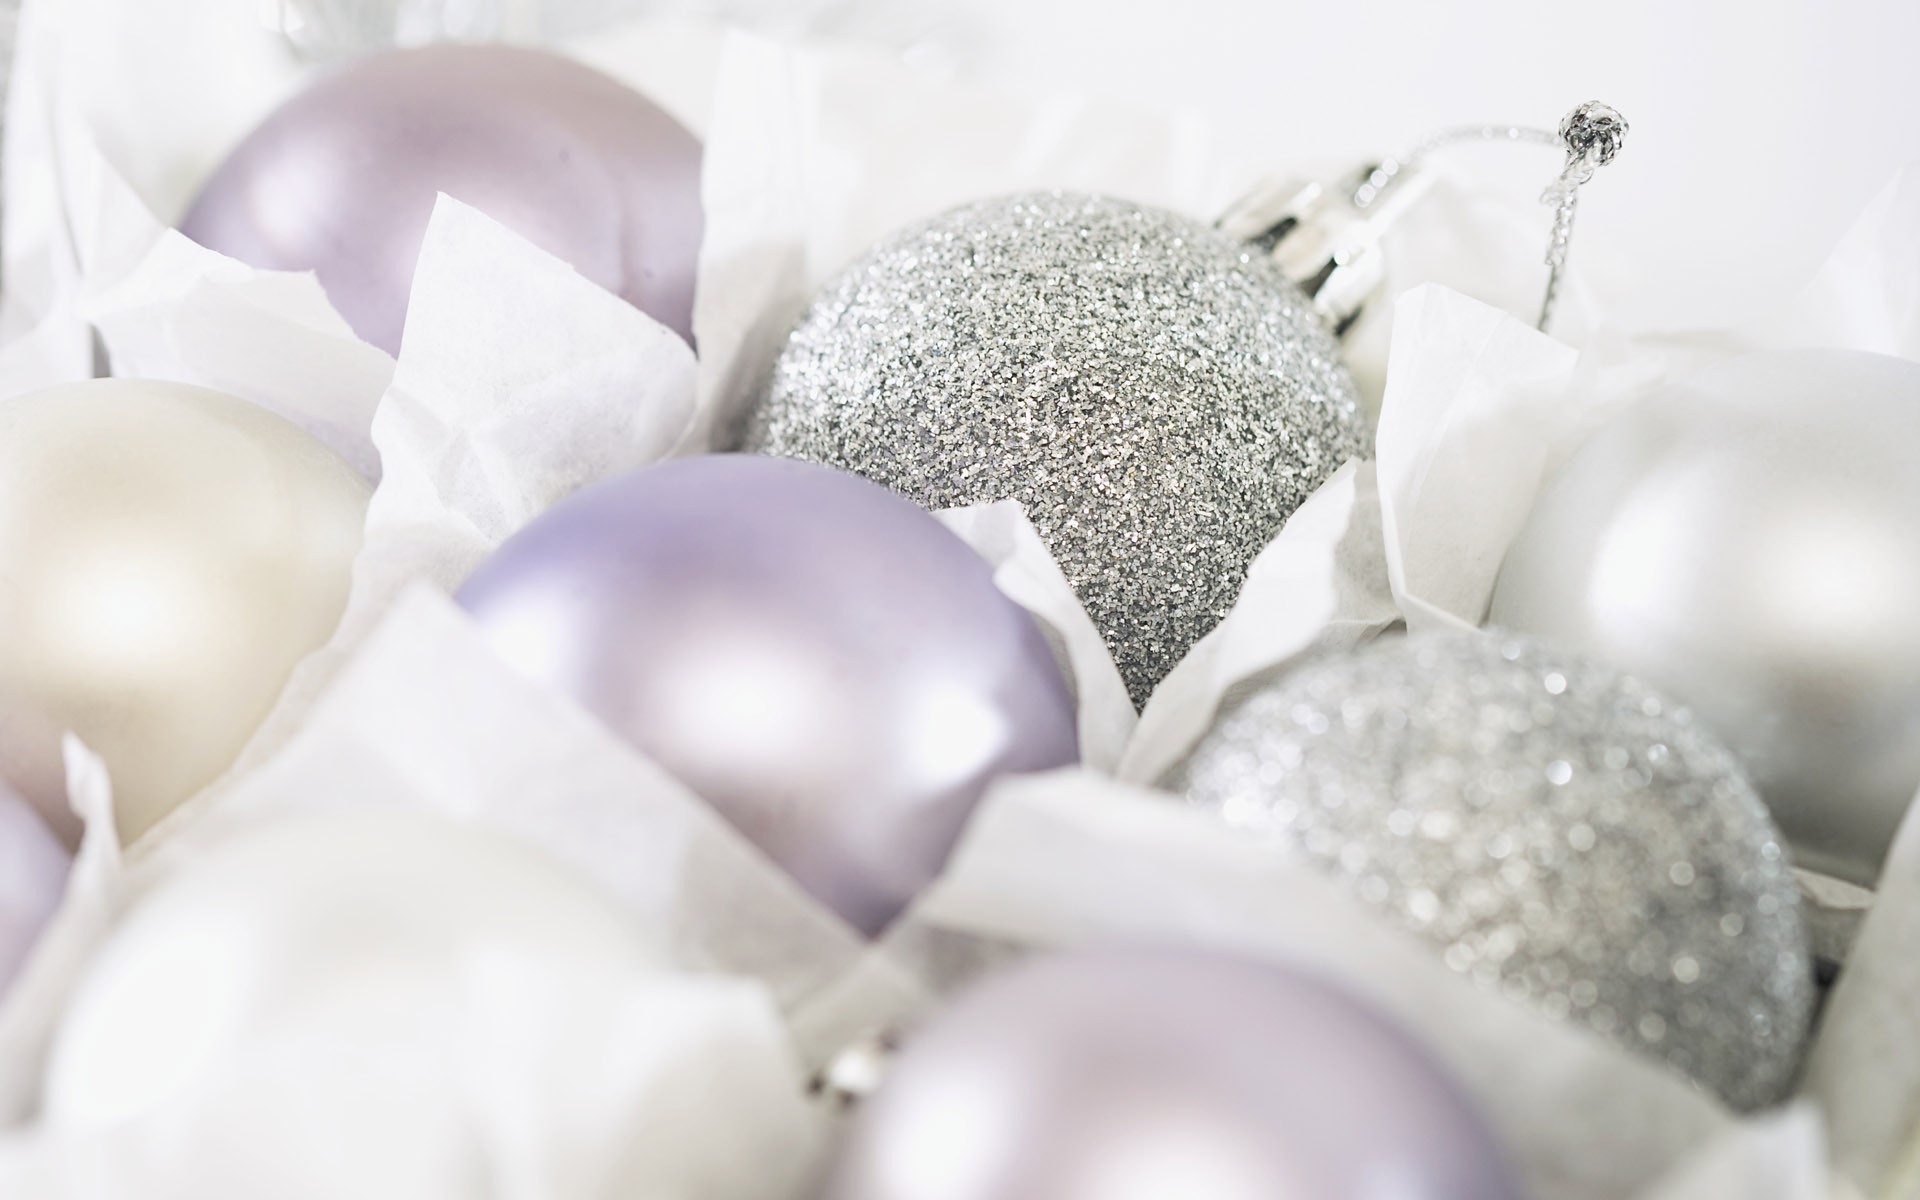 Awesome White Christmas Balls Accerories HD Wallpaper And Photo